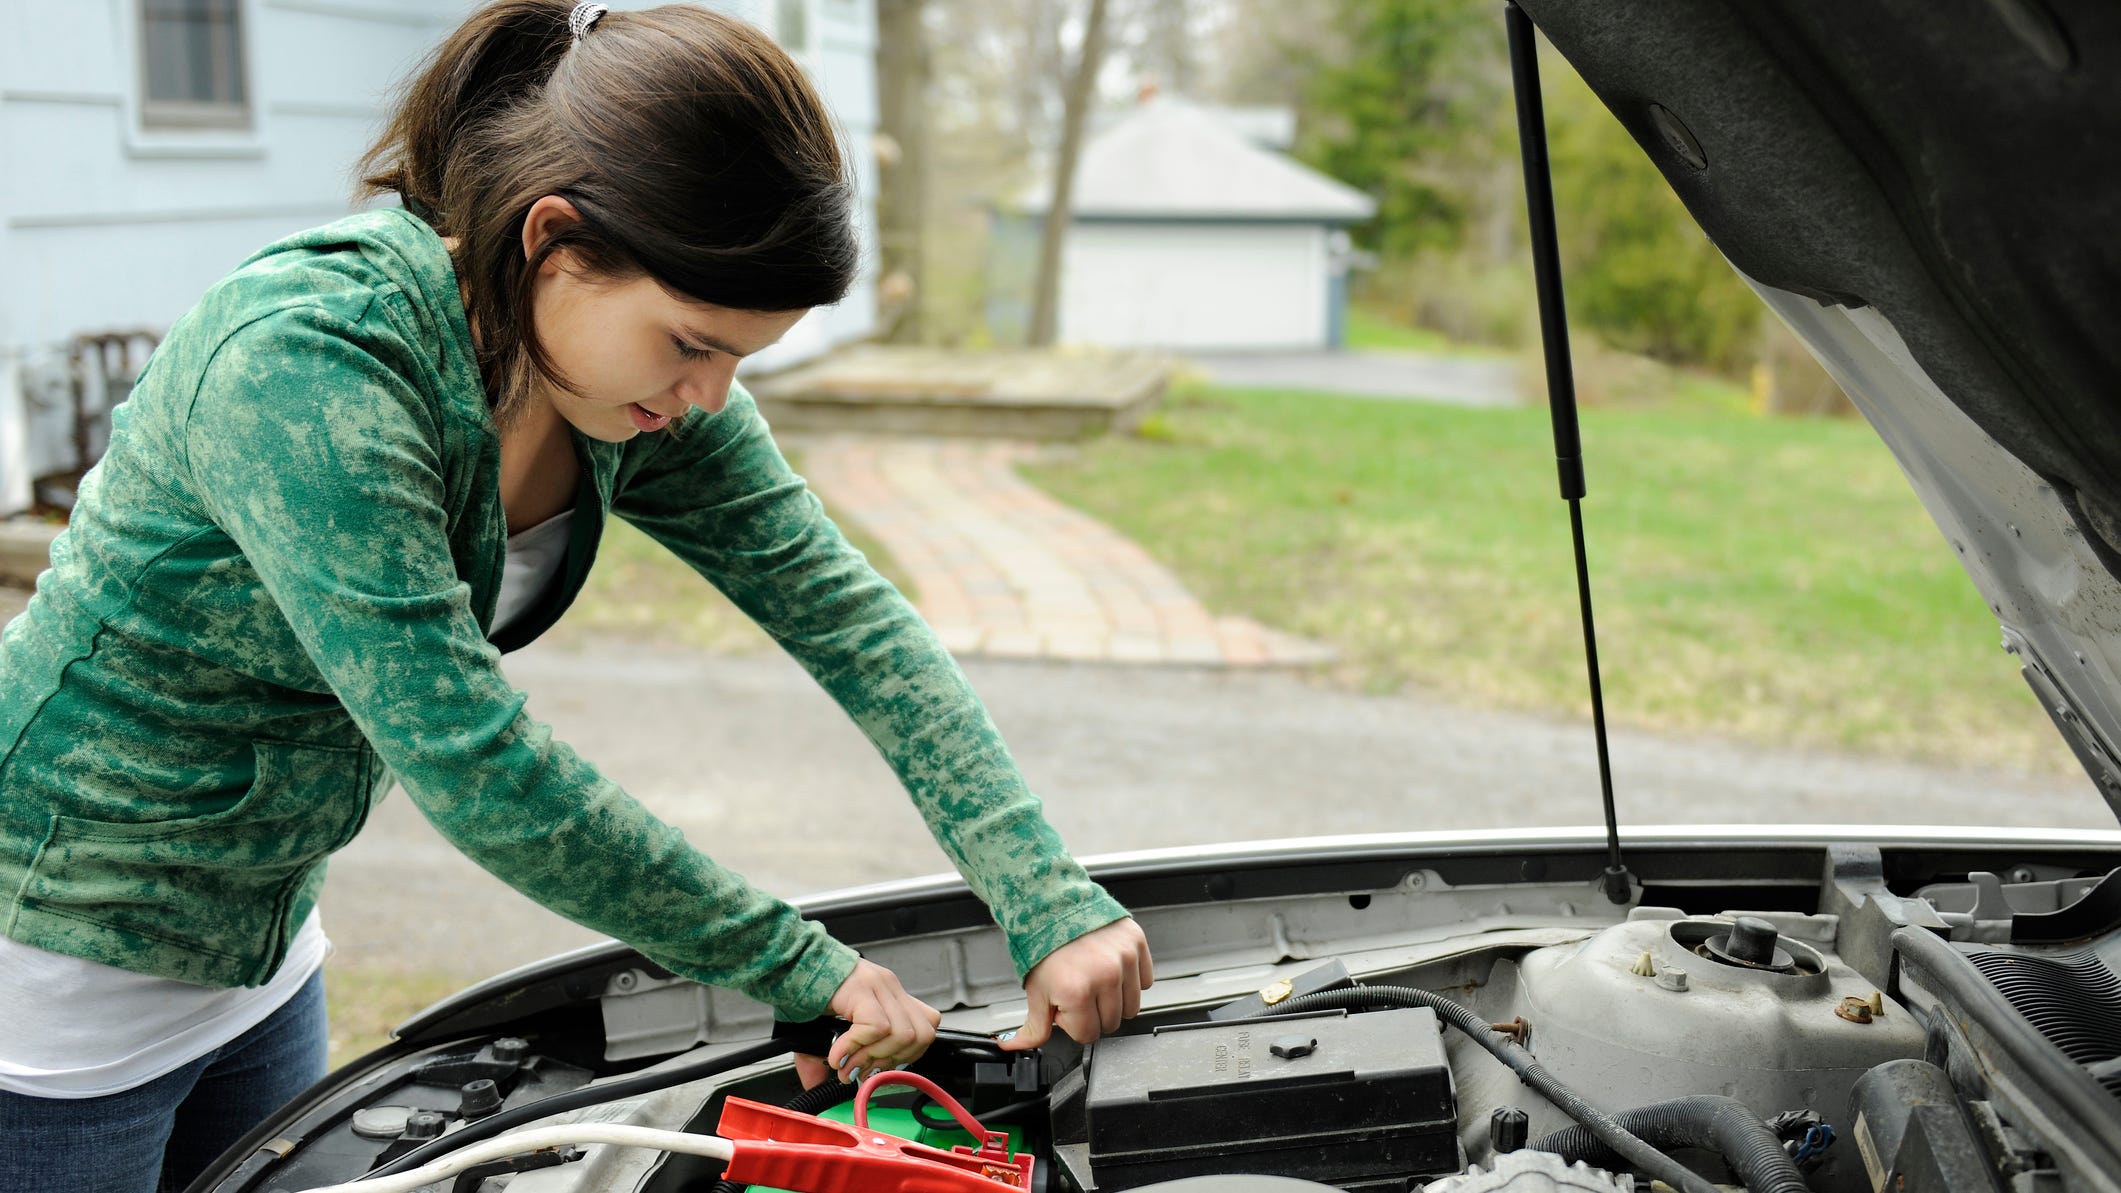 How to jump a car: What you need to know to get your vehicle back up and running